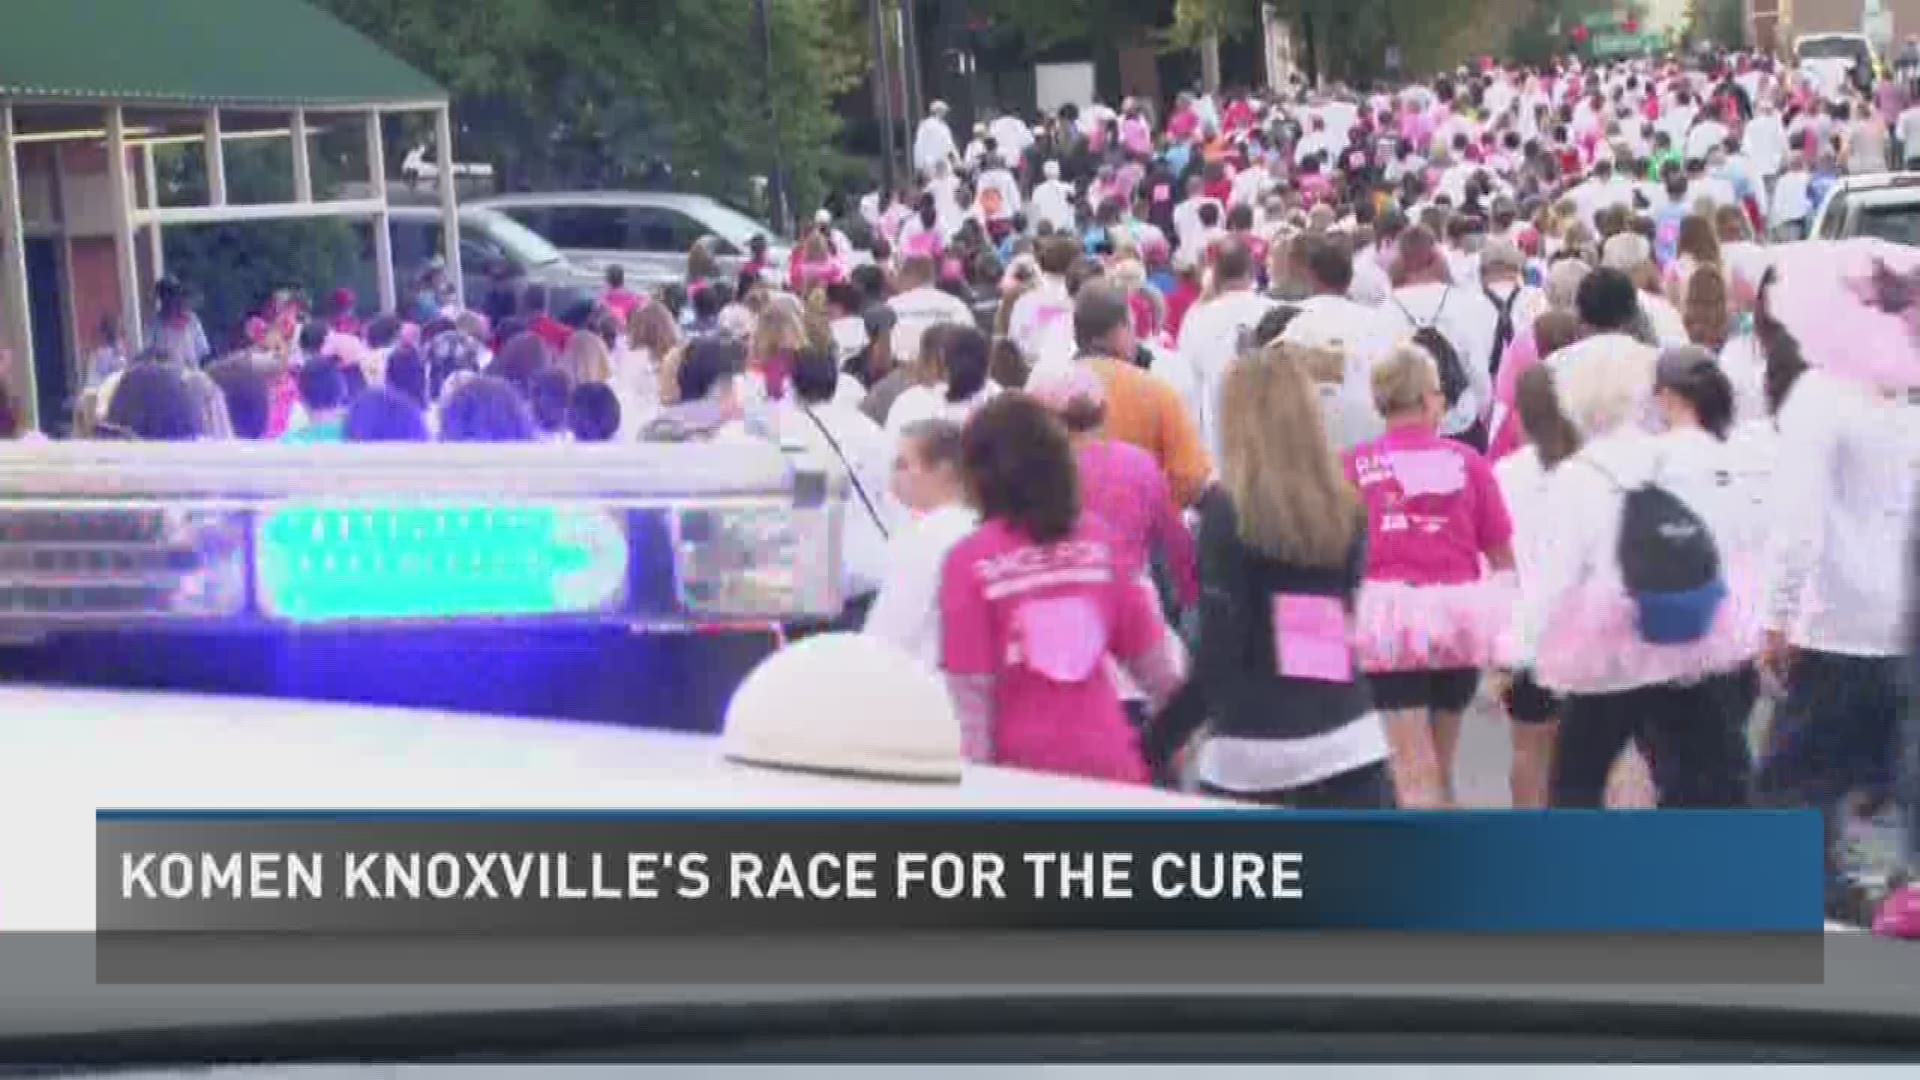 Komen Knoxville's Race for the Cure kicks off 20th season